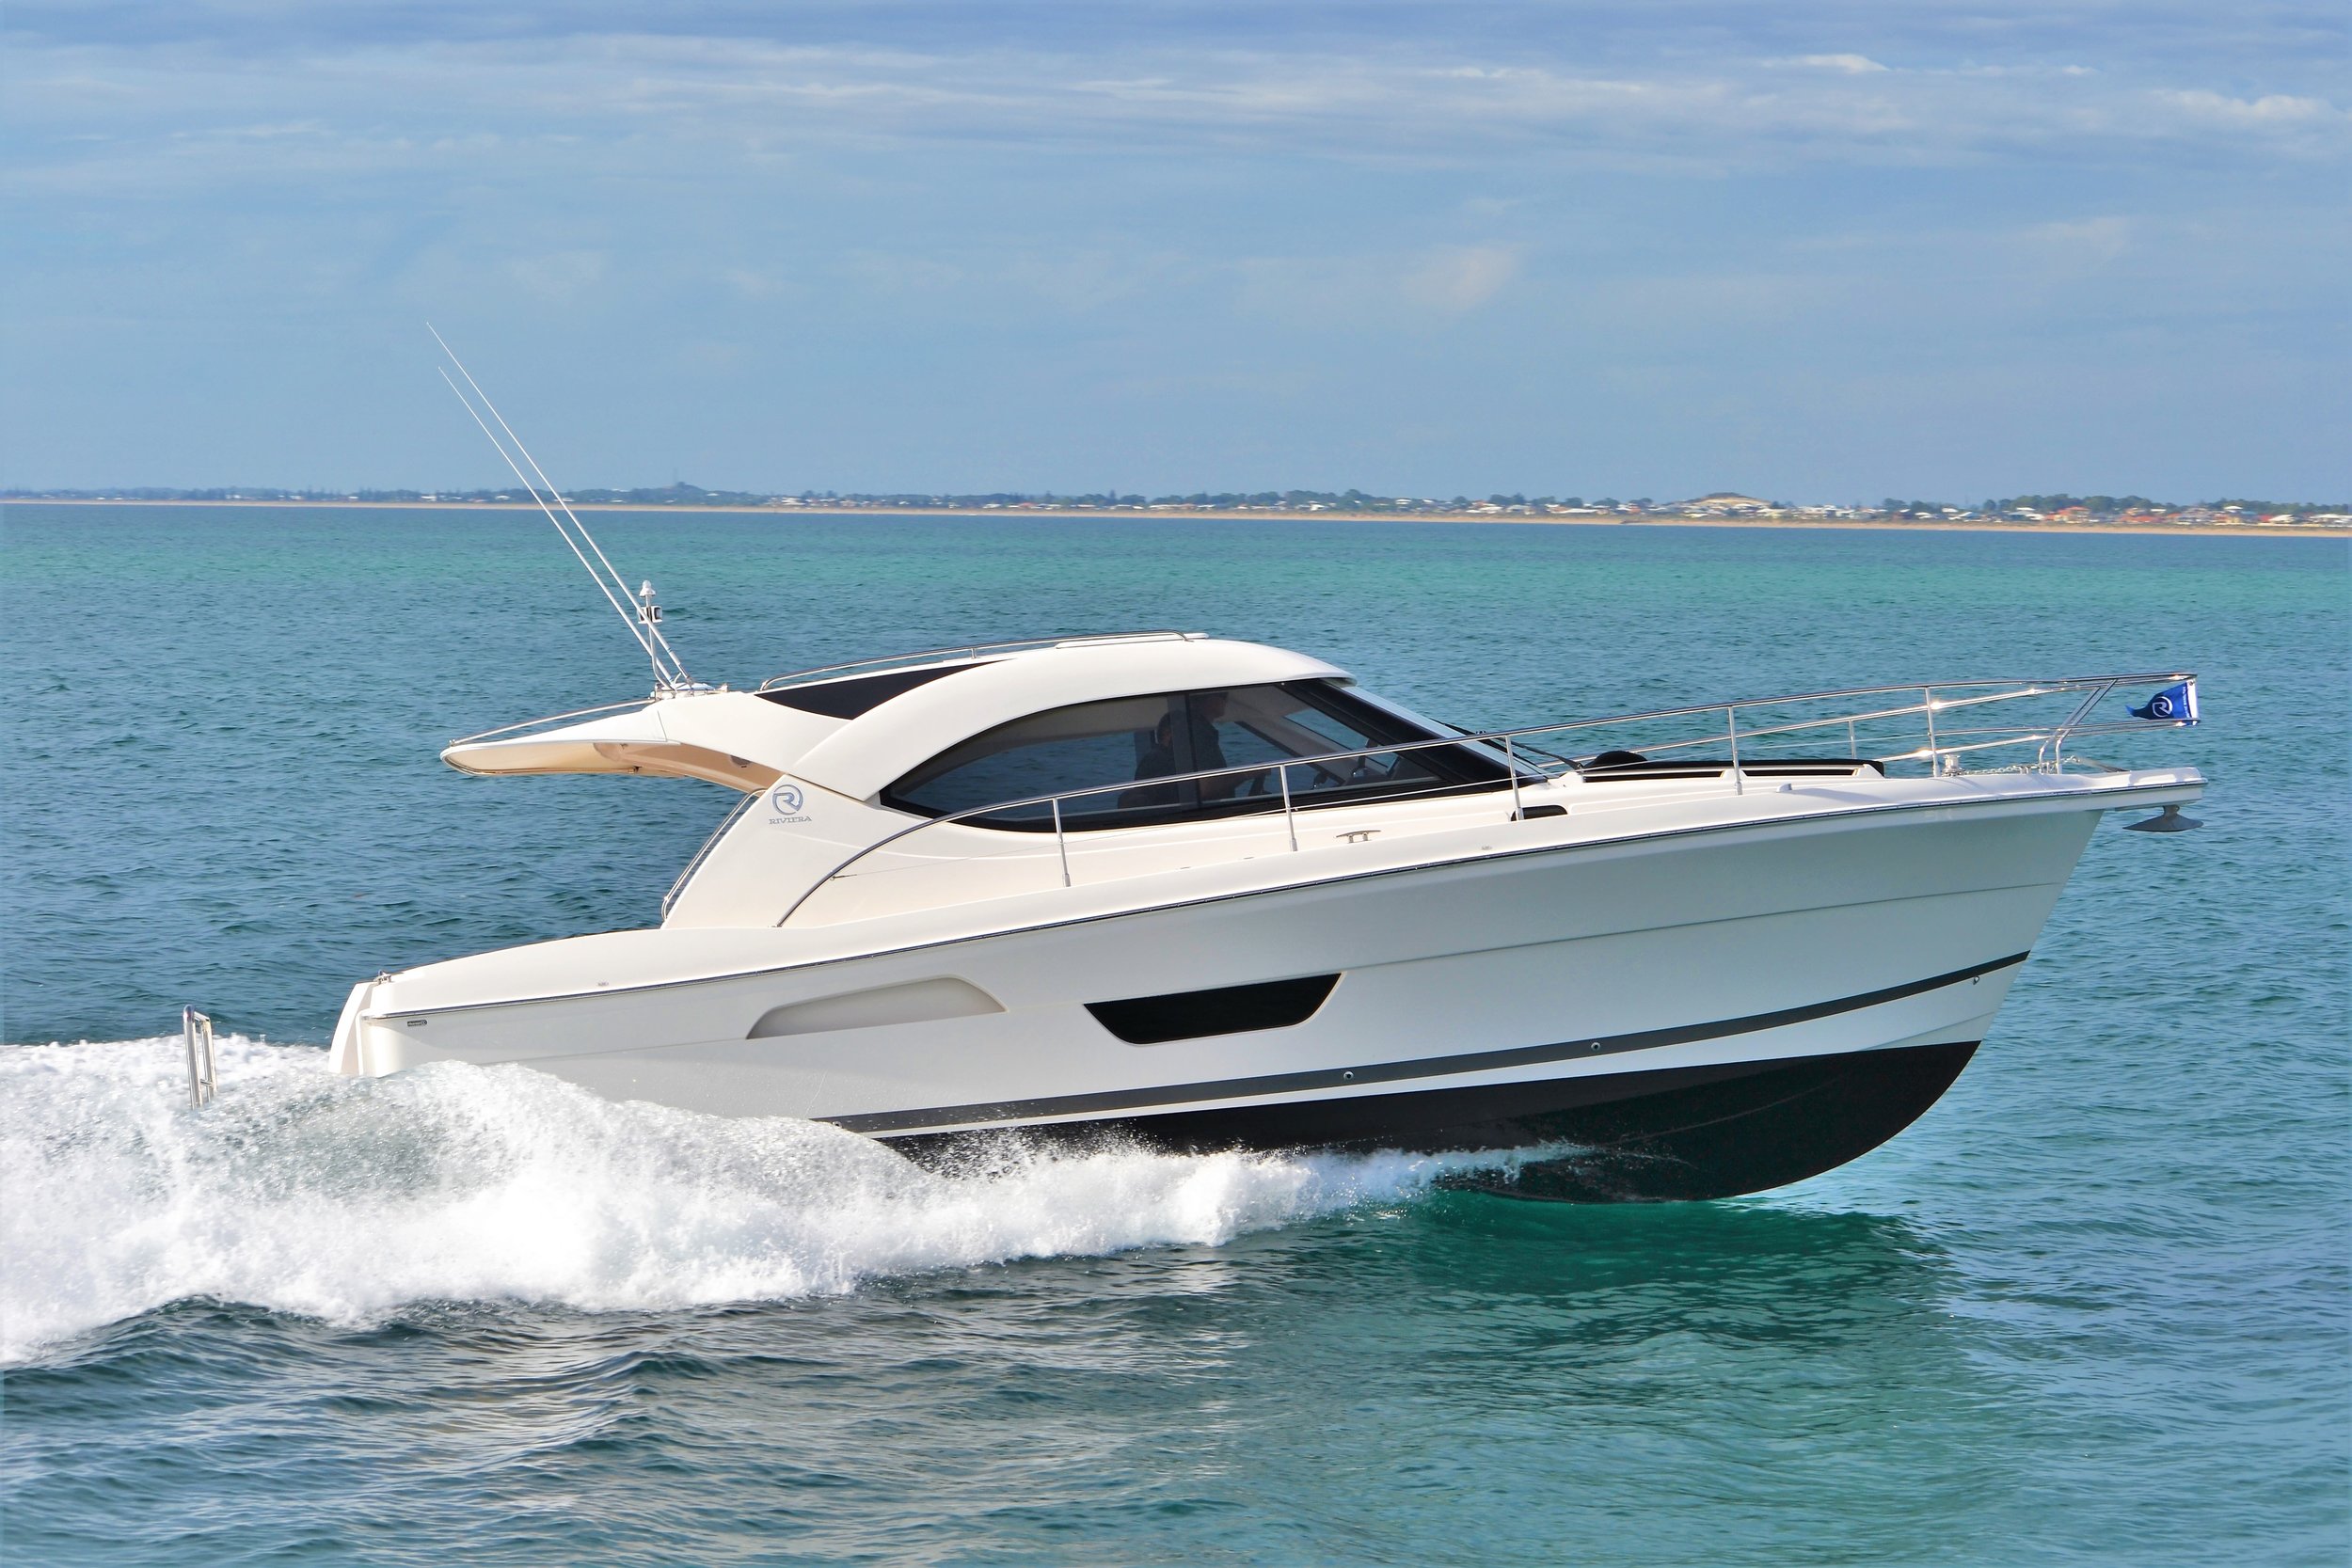 Riviera 3600 Sport Yacht  $154,000 per 1/5 share.  Seeking further expressions of interest